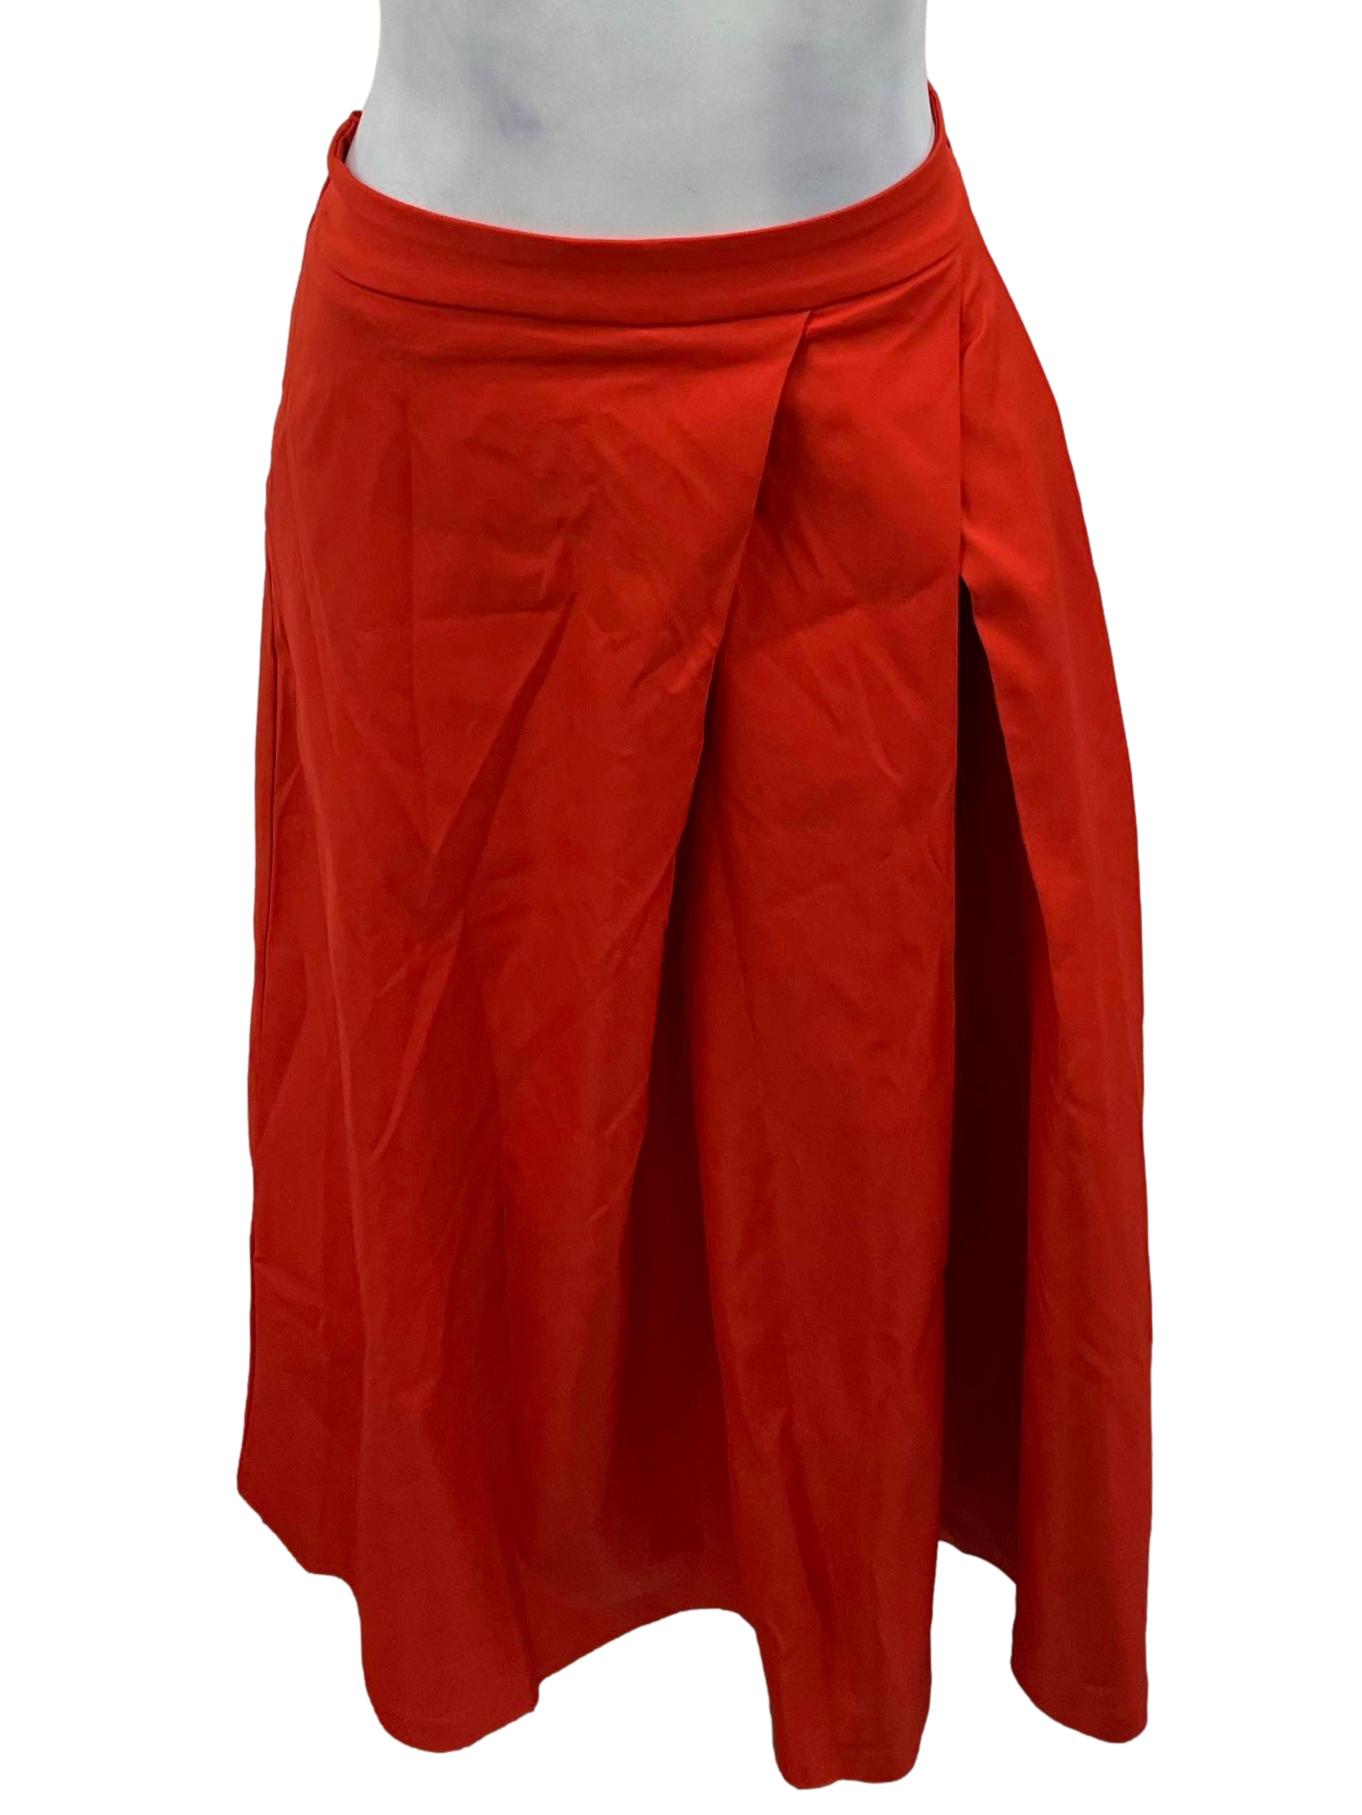 Candy Red Flare Skirt